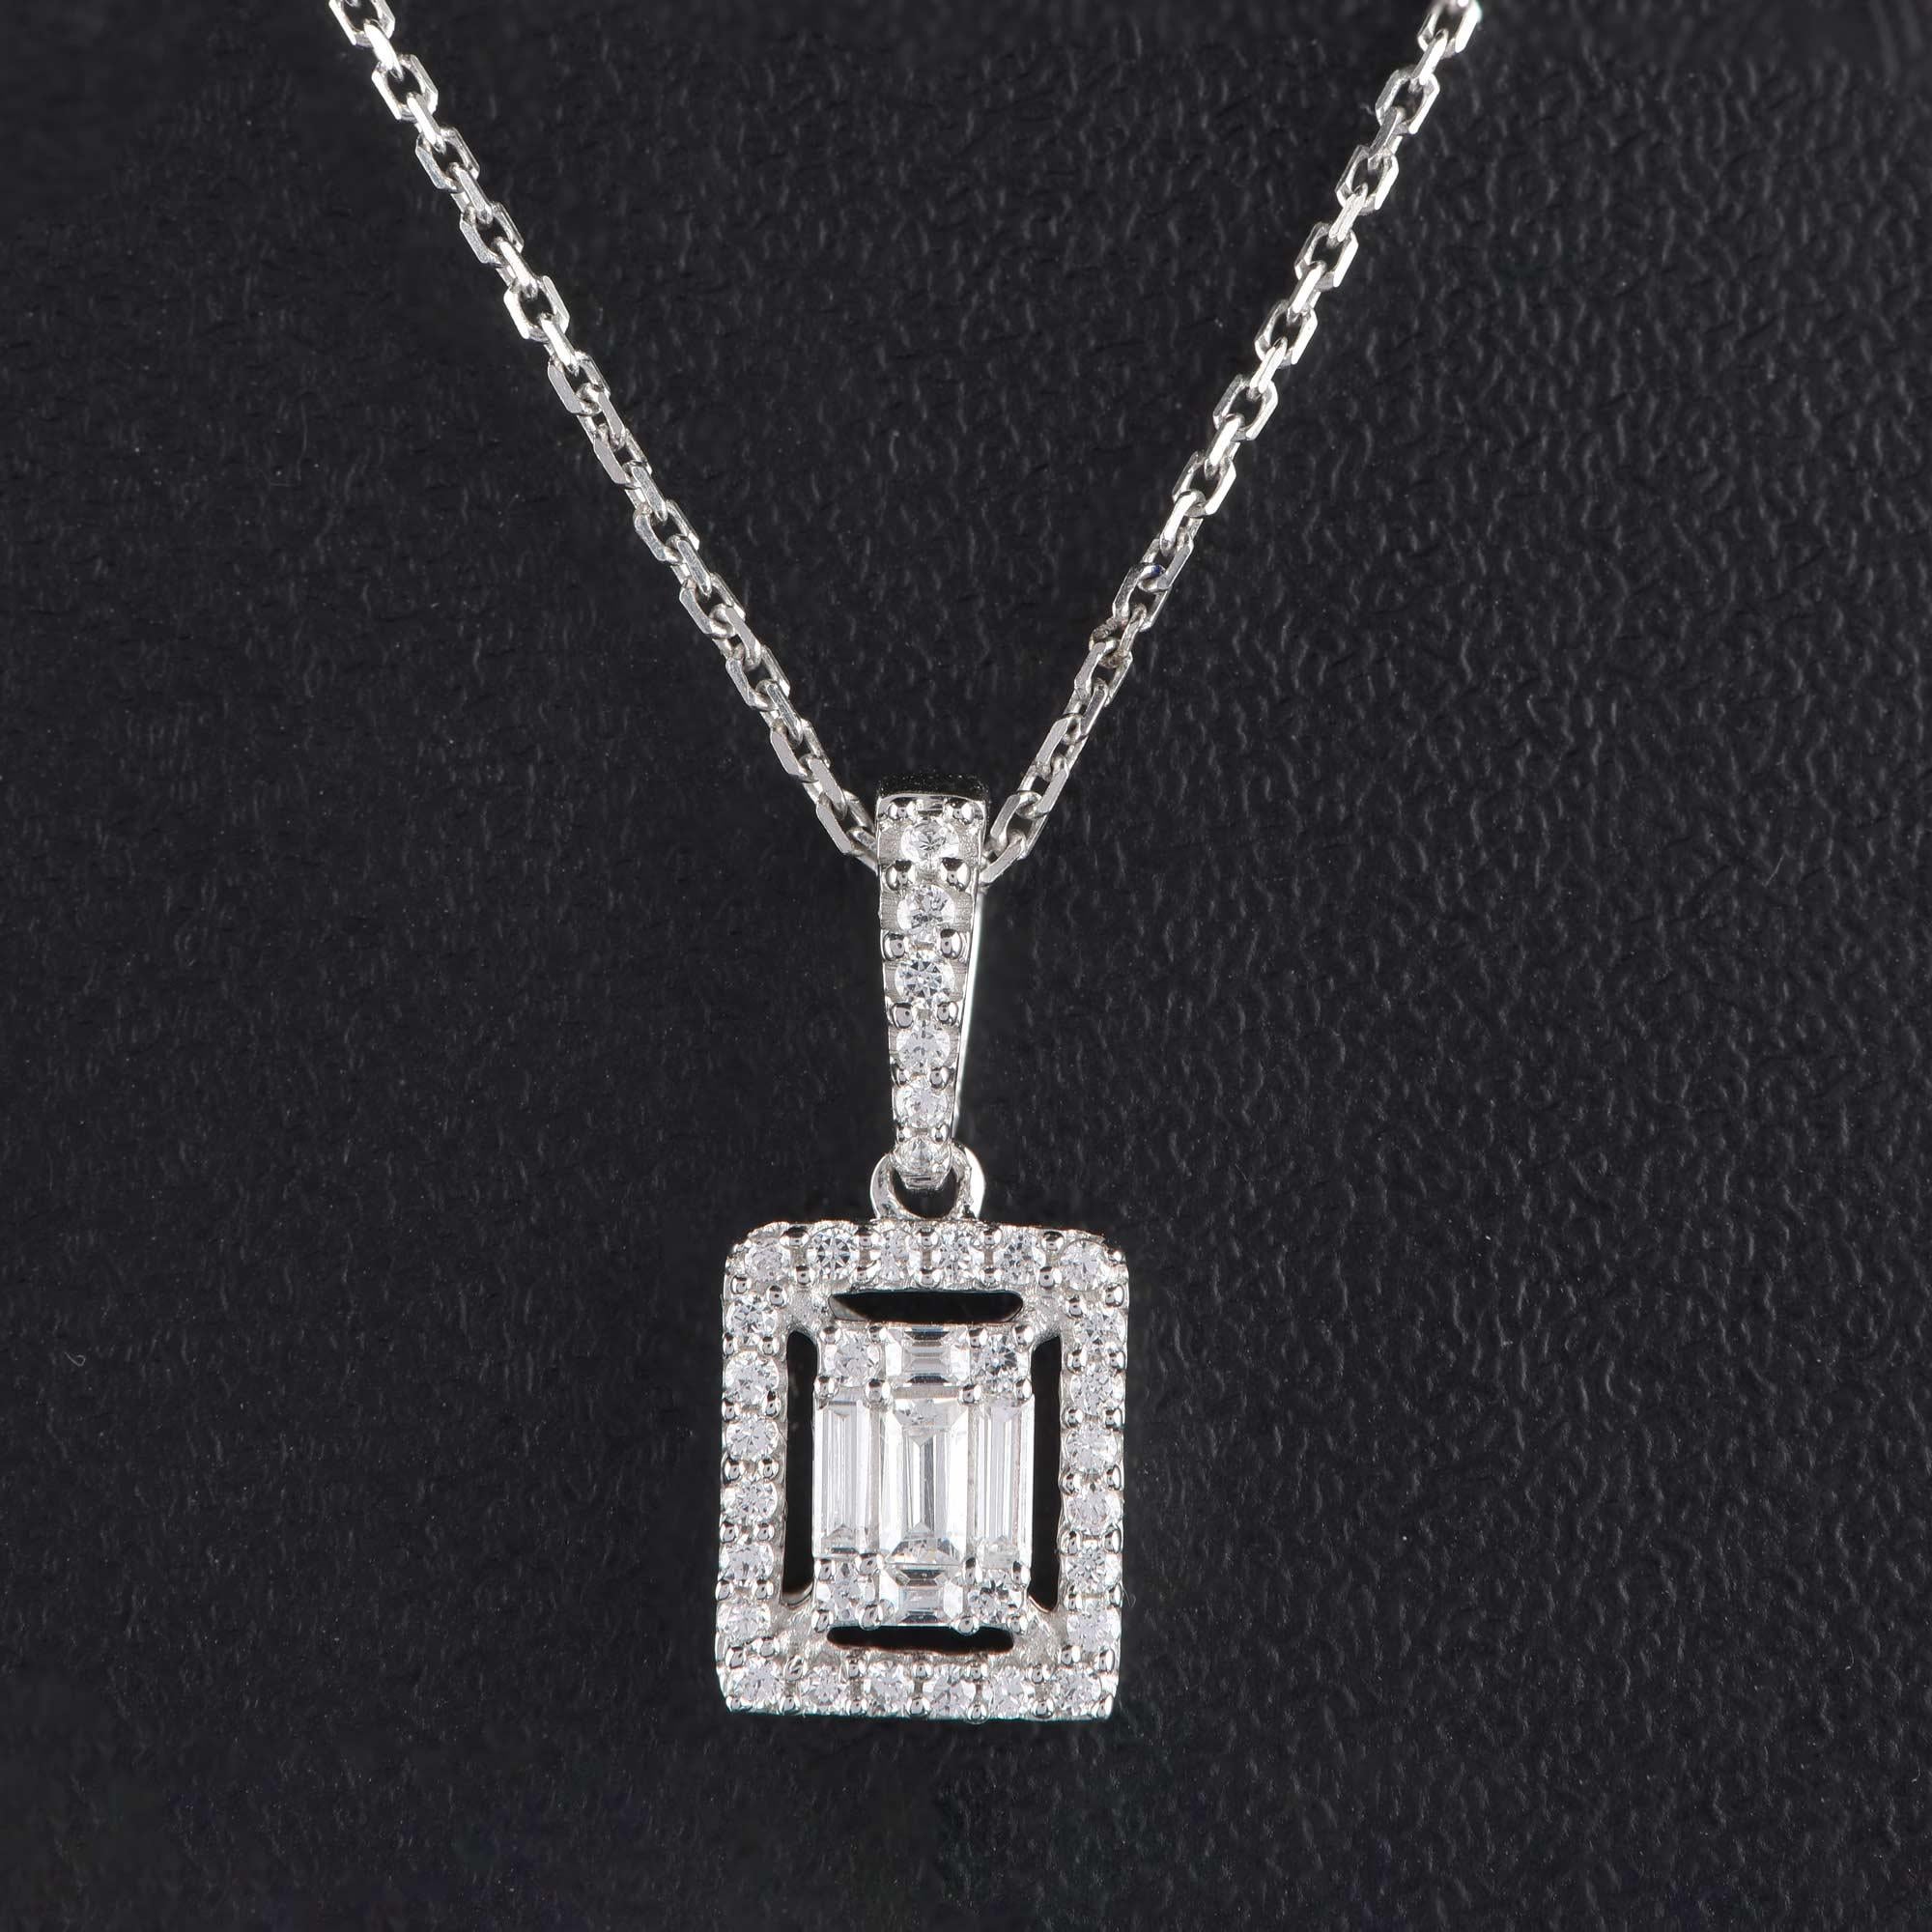 Crafted in 18-karat white gold and embedded with 34 brilliant cut and 5 baguette shape diamonds in prong setting. Diamonds are graded H-I Color, I2 Clarity. The pendant comes along with an 18 inch cable chain.

